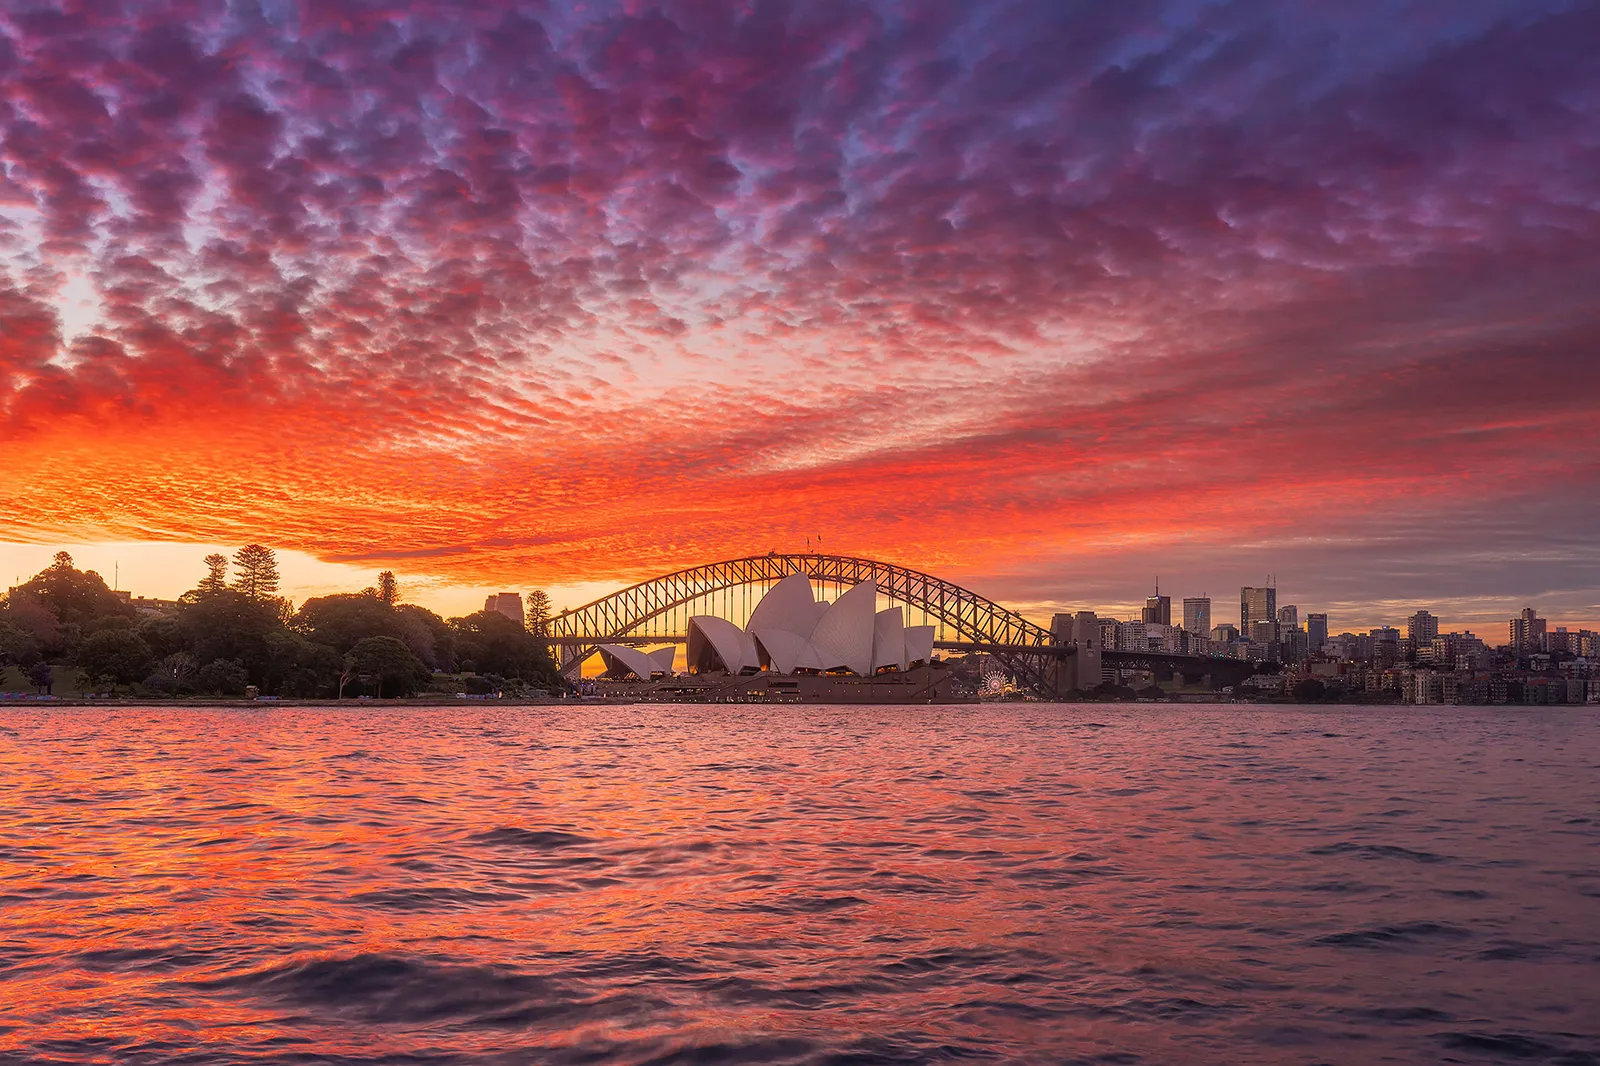 One of the most colorful sunset above The Sydney Opera House and The Harbour Bridge behind it. These two are the most iconic constructions of Australia.